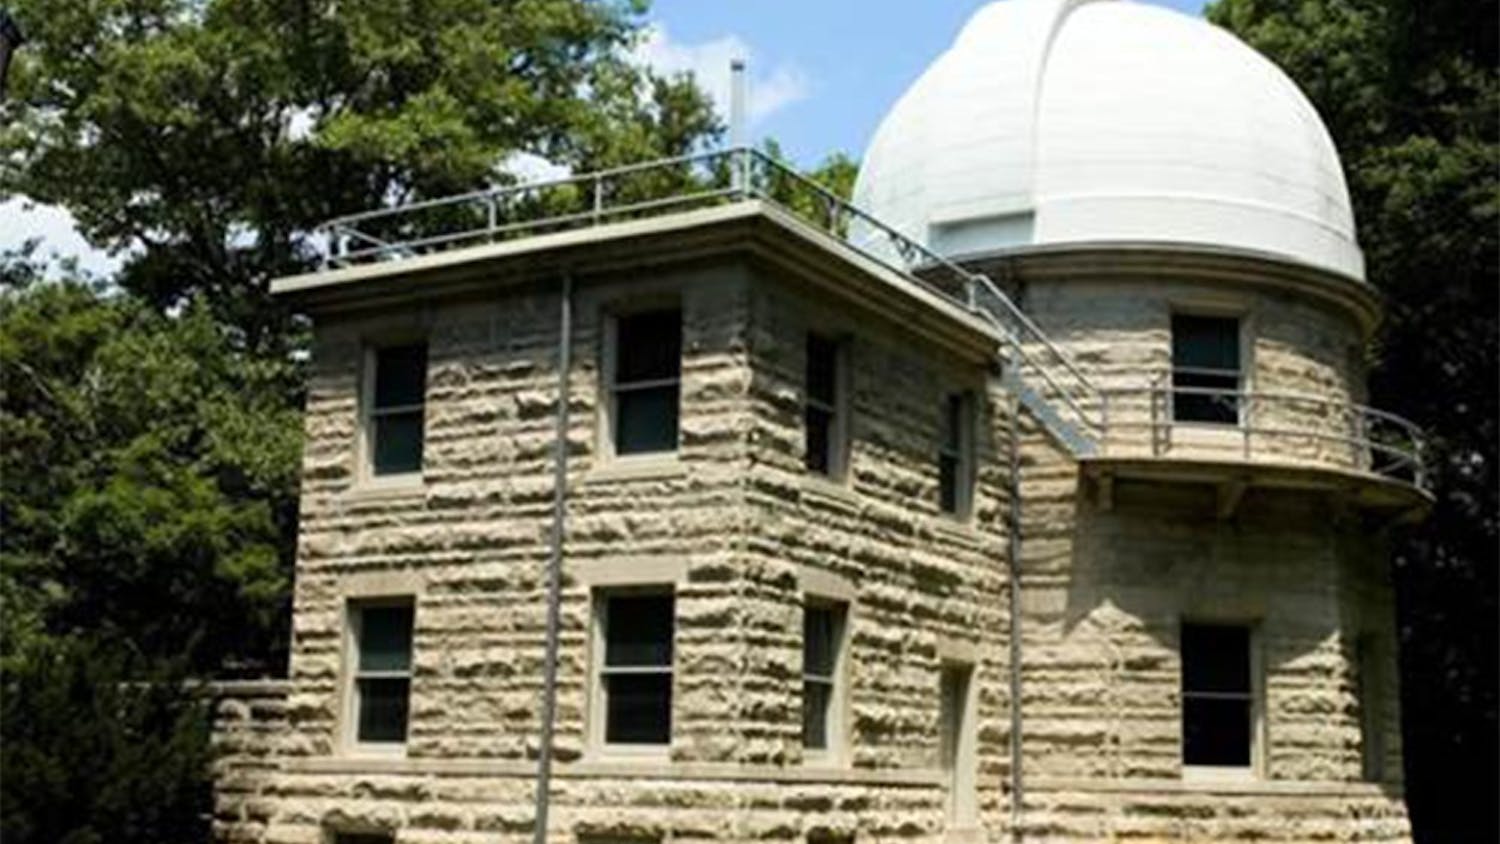 The Bloomington Professional Council is hosting tours of the Kirkwood Observatory on Tuesday.  The tours are meant to showcase what the IU campus has to offer to Bloomington locals.